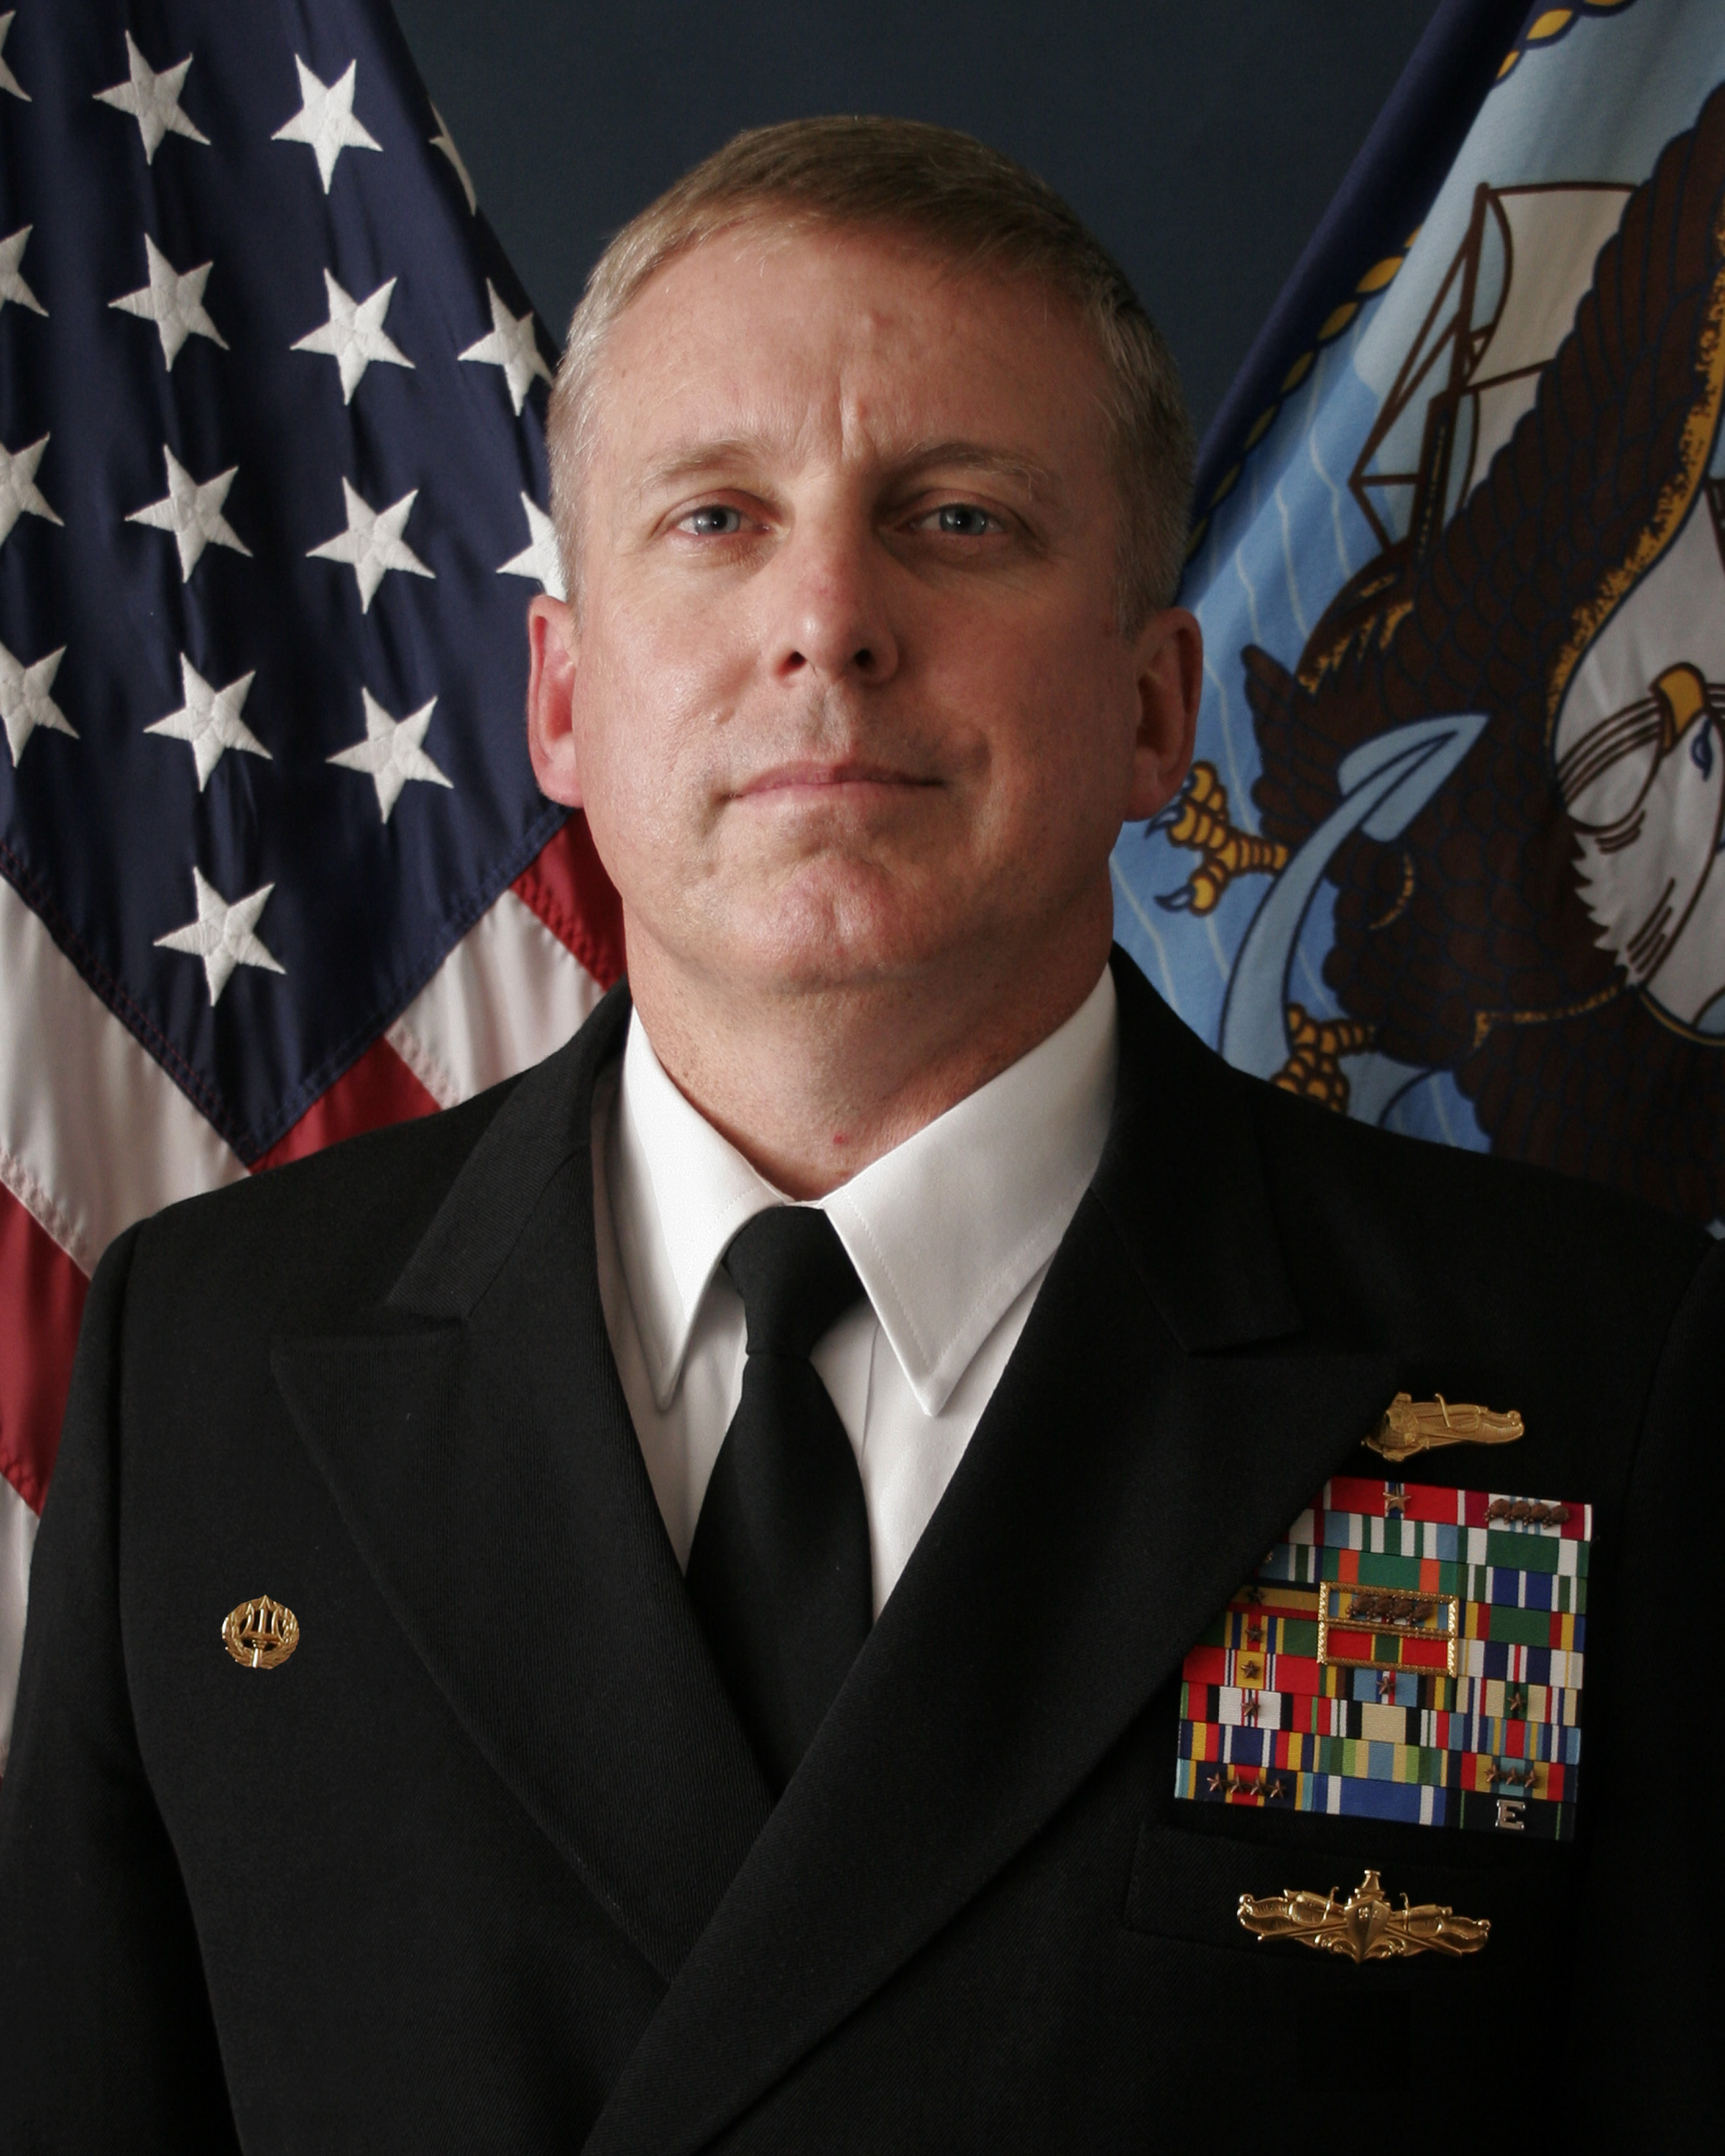 Capt. Mark Kester, commanding officer of Information Warfare Training Command Virginia Beach, relinquishes command on Dec. 1, 2016, and reports to Naval Information Forces as the next chief of staff. Photo courtesy of U.S. Navy.